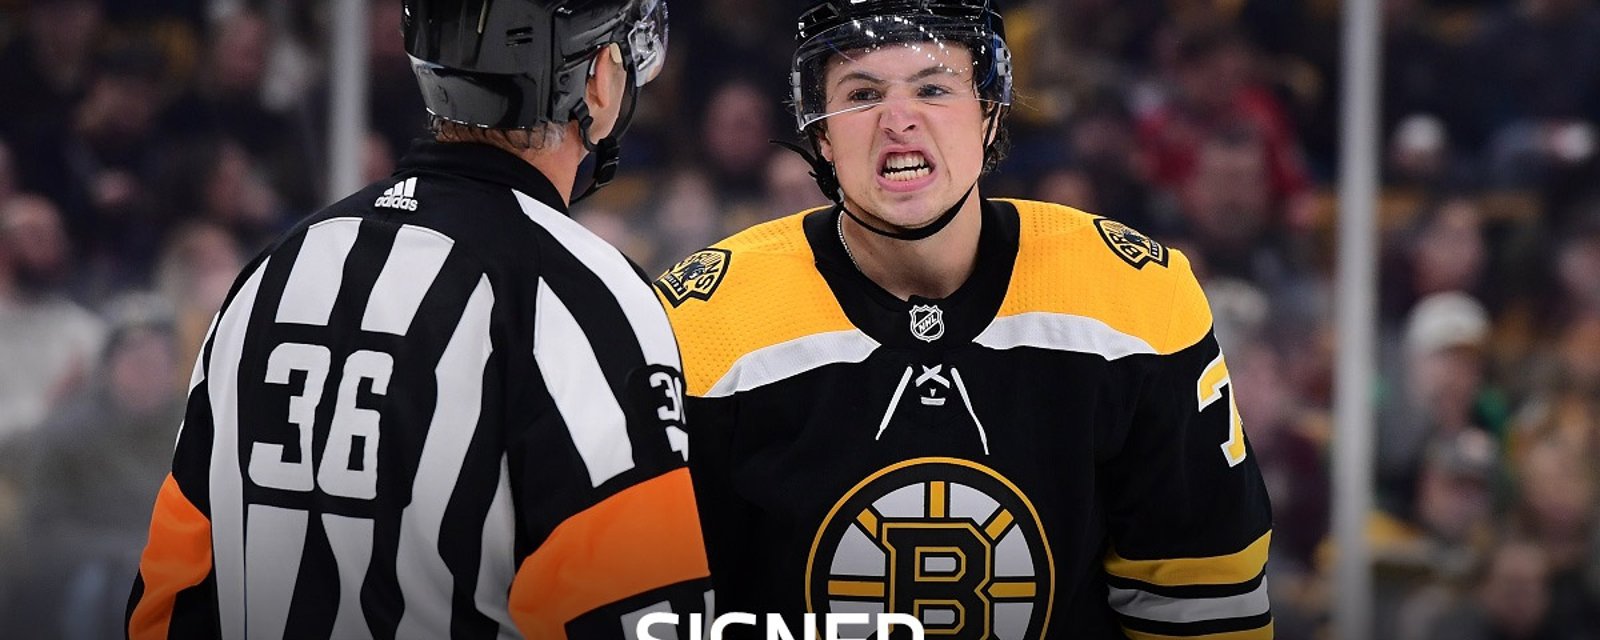 Breaking: Bruins sign Charlie McAvoy to a brand new deal.